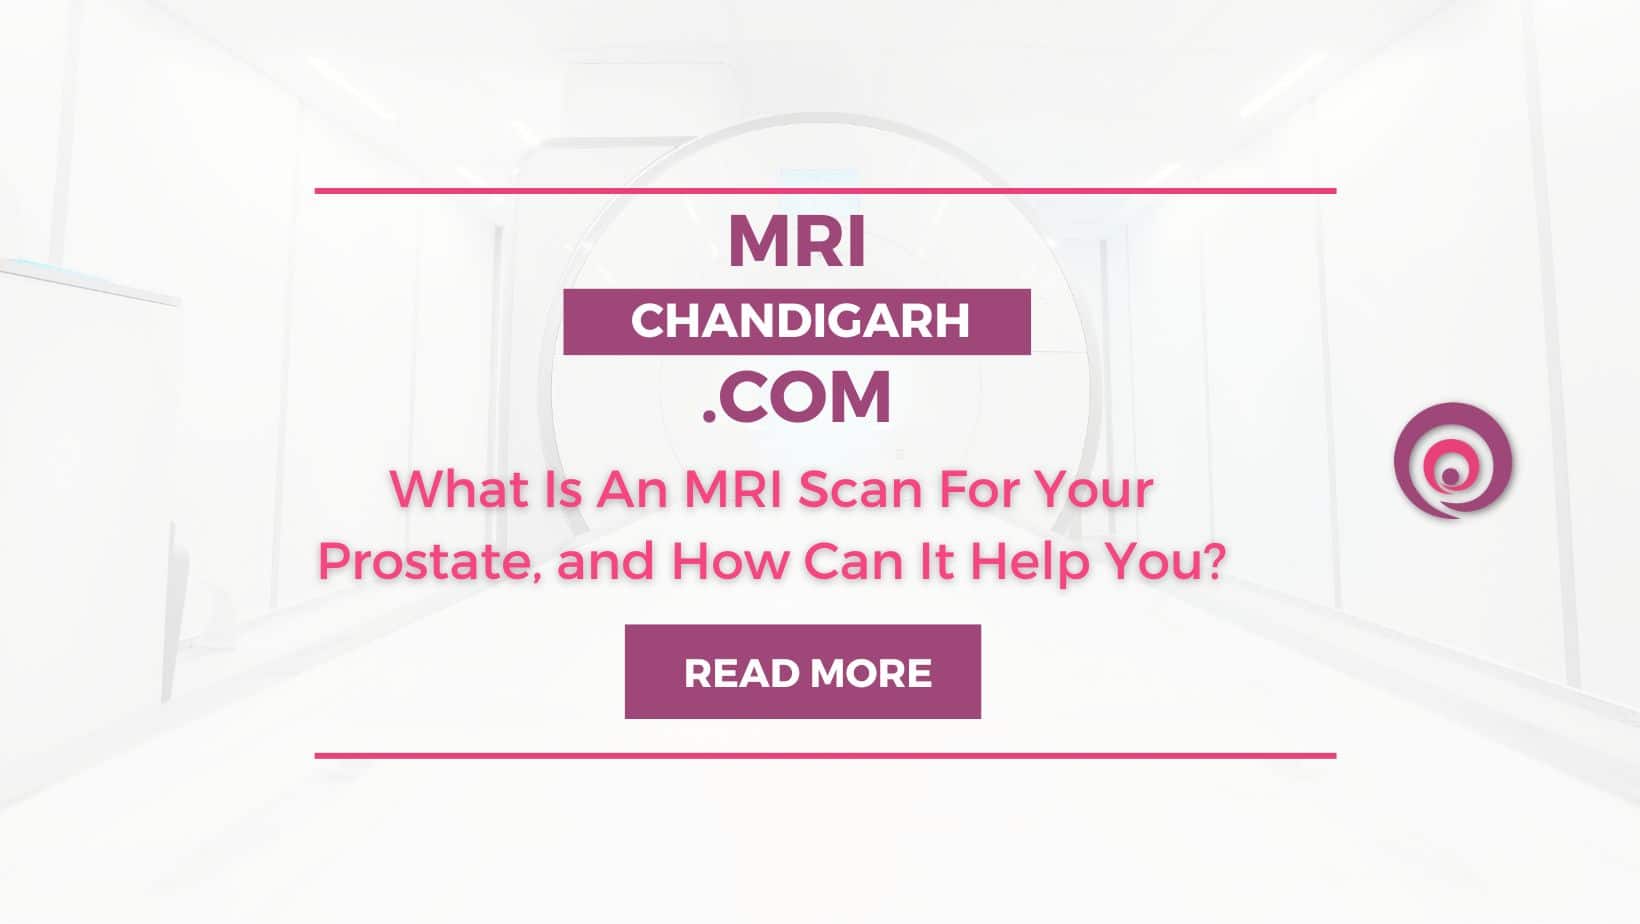 What Is An MRI Scan For Your Prostate, and How Can It Help You?